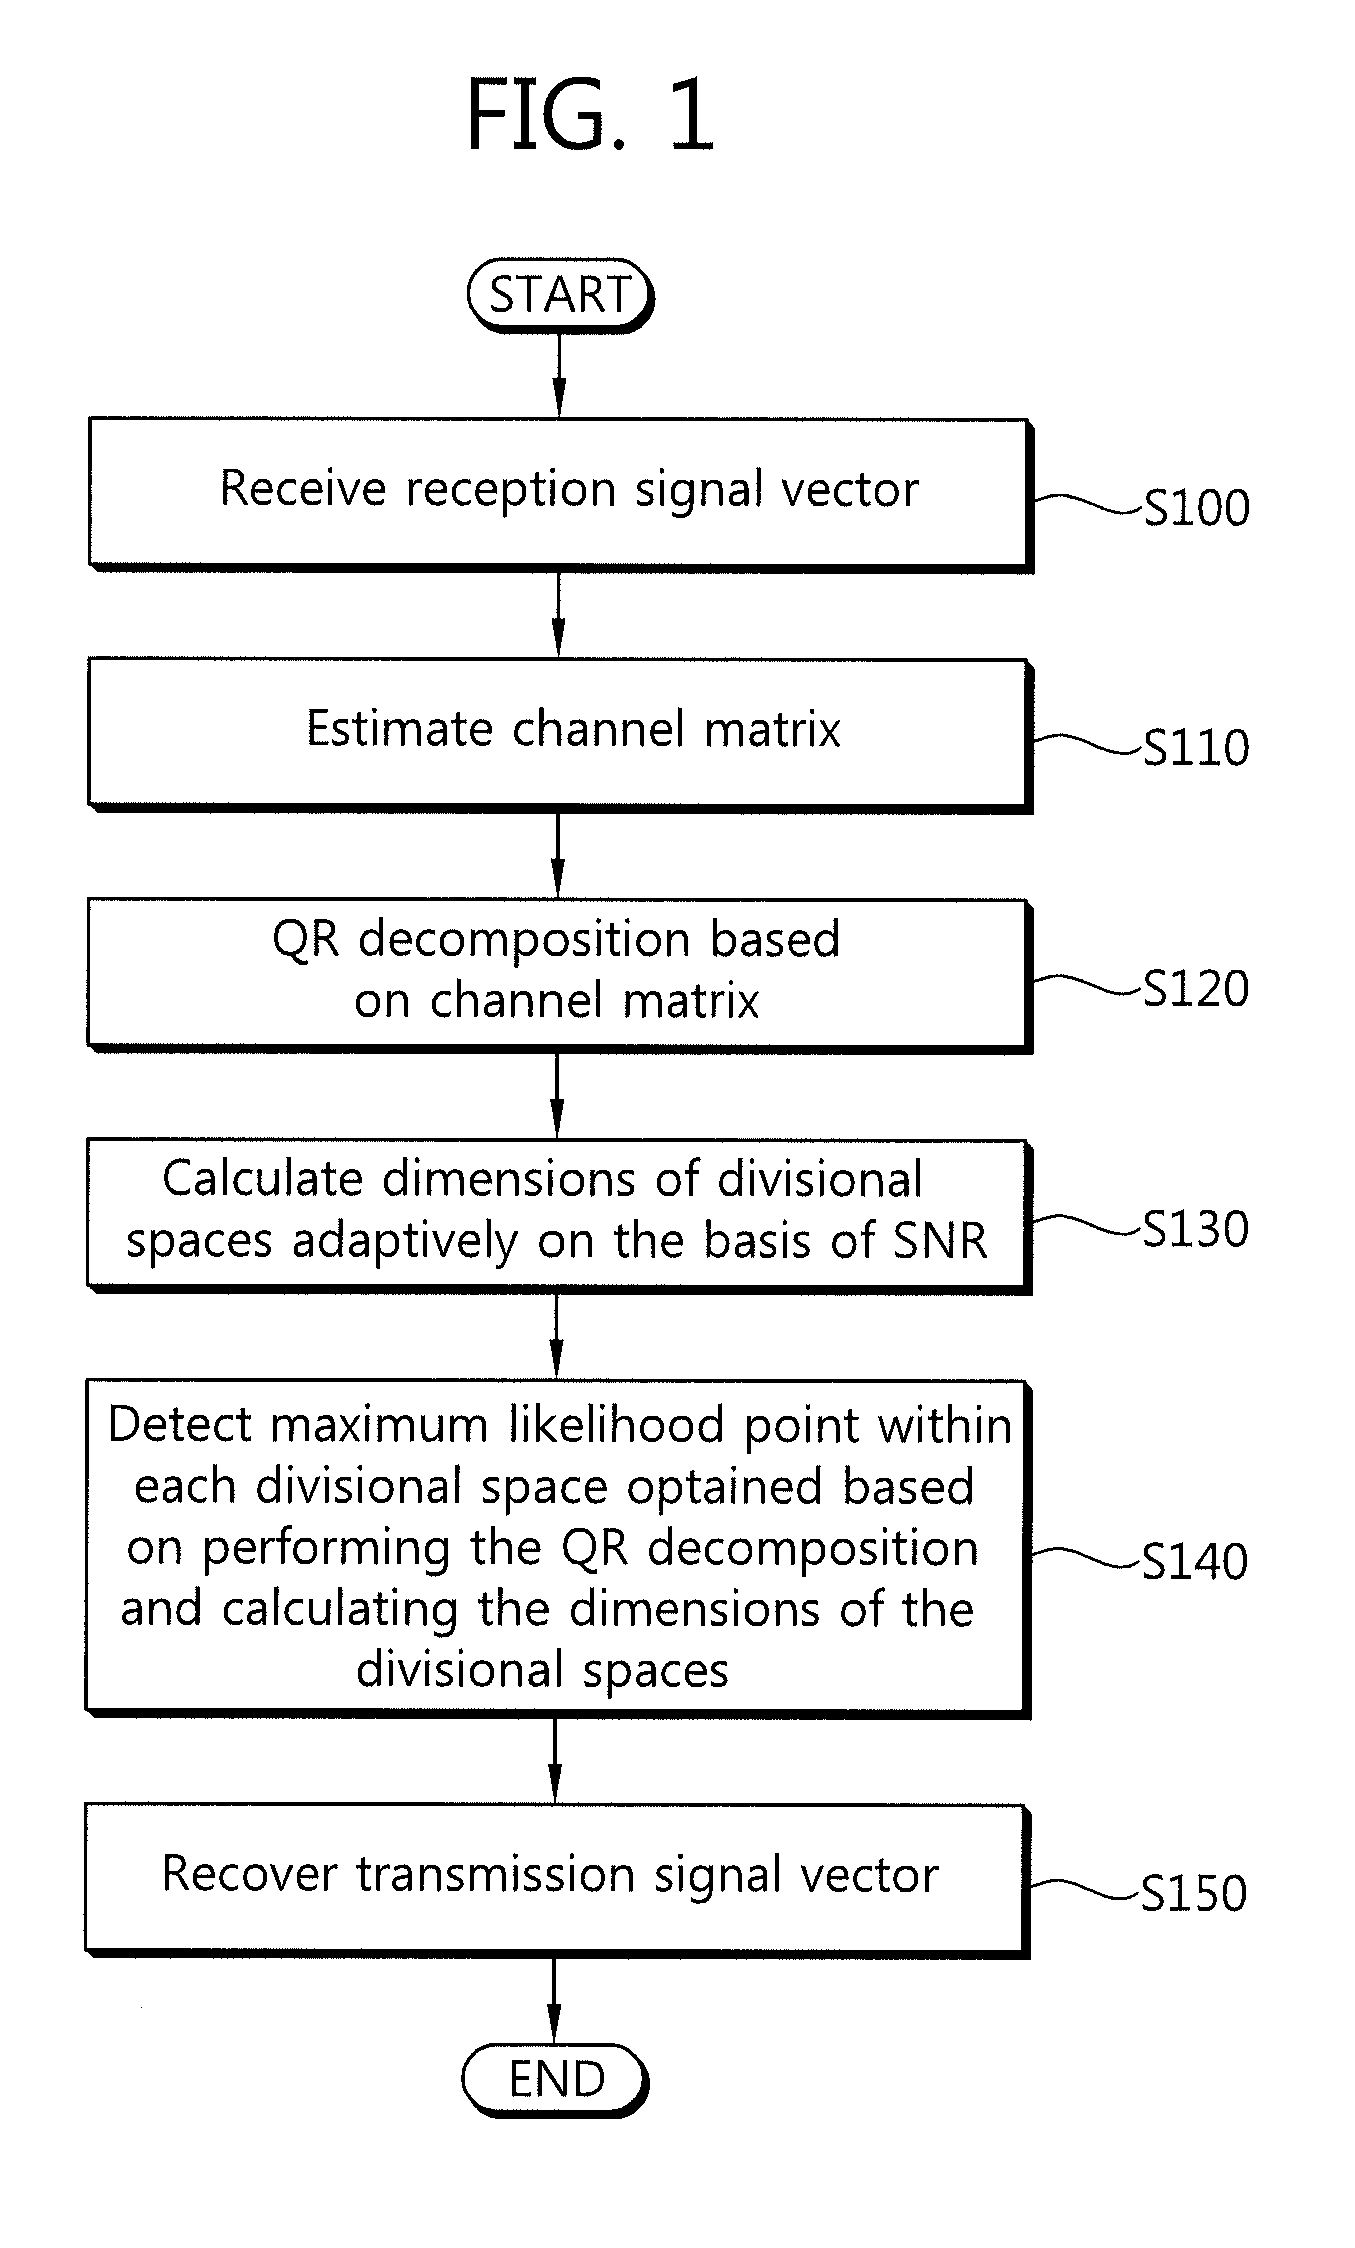 Method and apparatus of adaptive transmission signal detection based on signal-to-noise ratio and chi-squared distribution